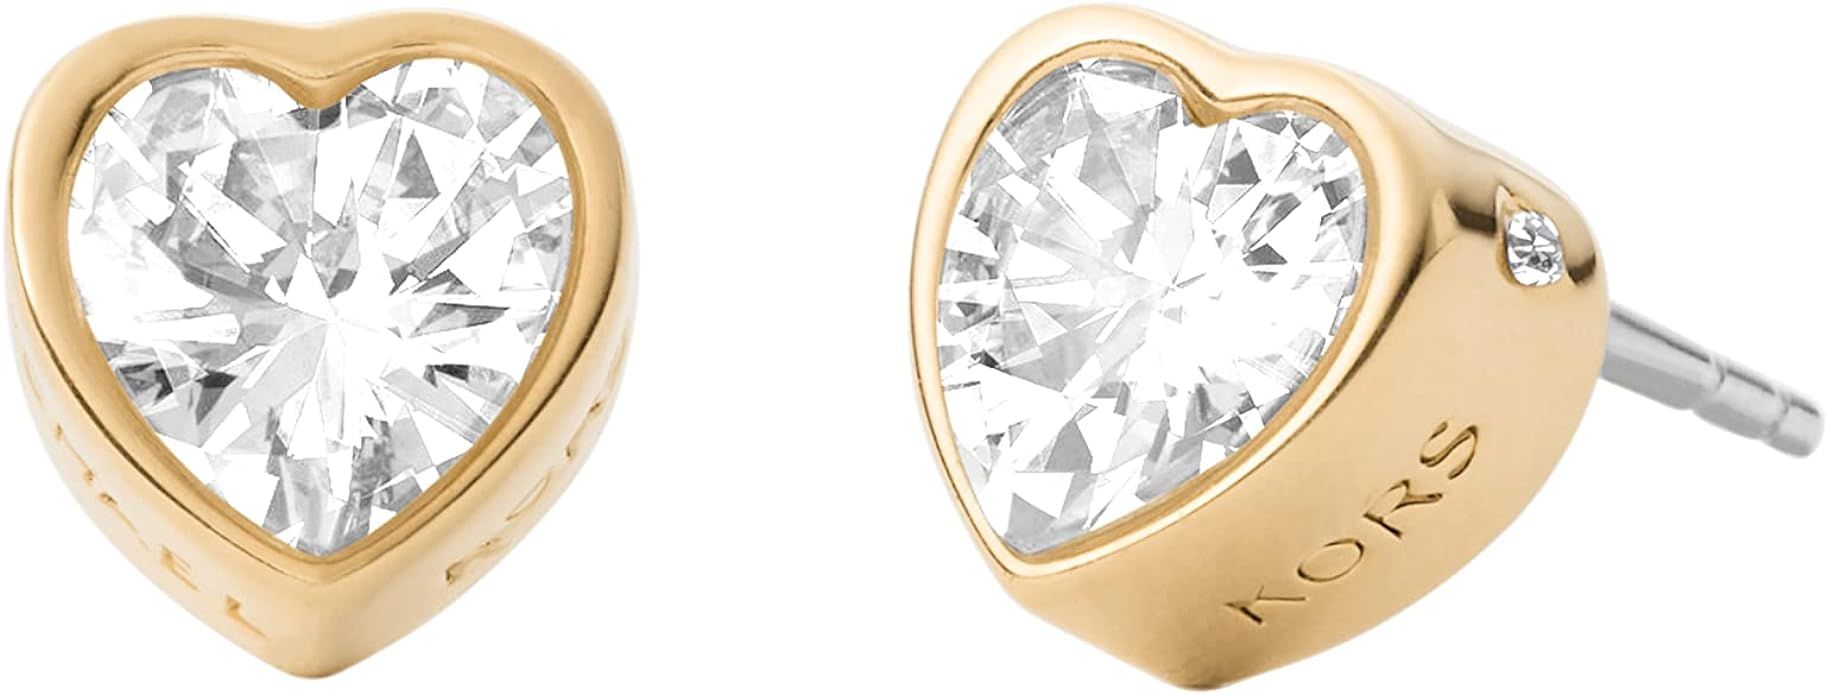 Michael Kors Women's Stainless Steel Heart Shaped Stud Earrings With Crystal Accents | Amazon (US)